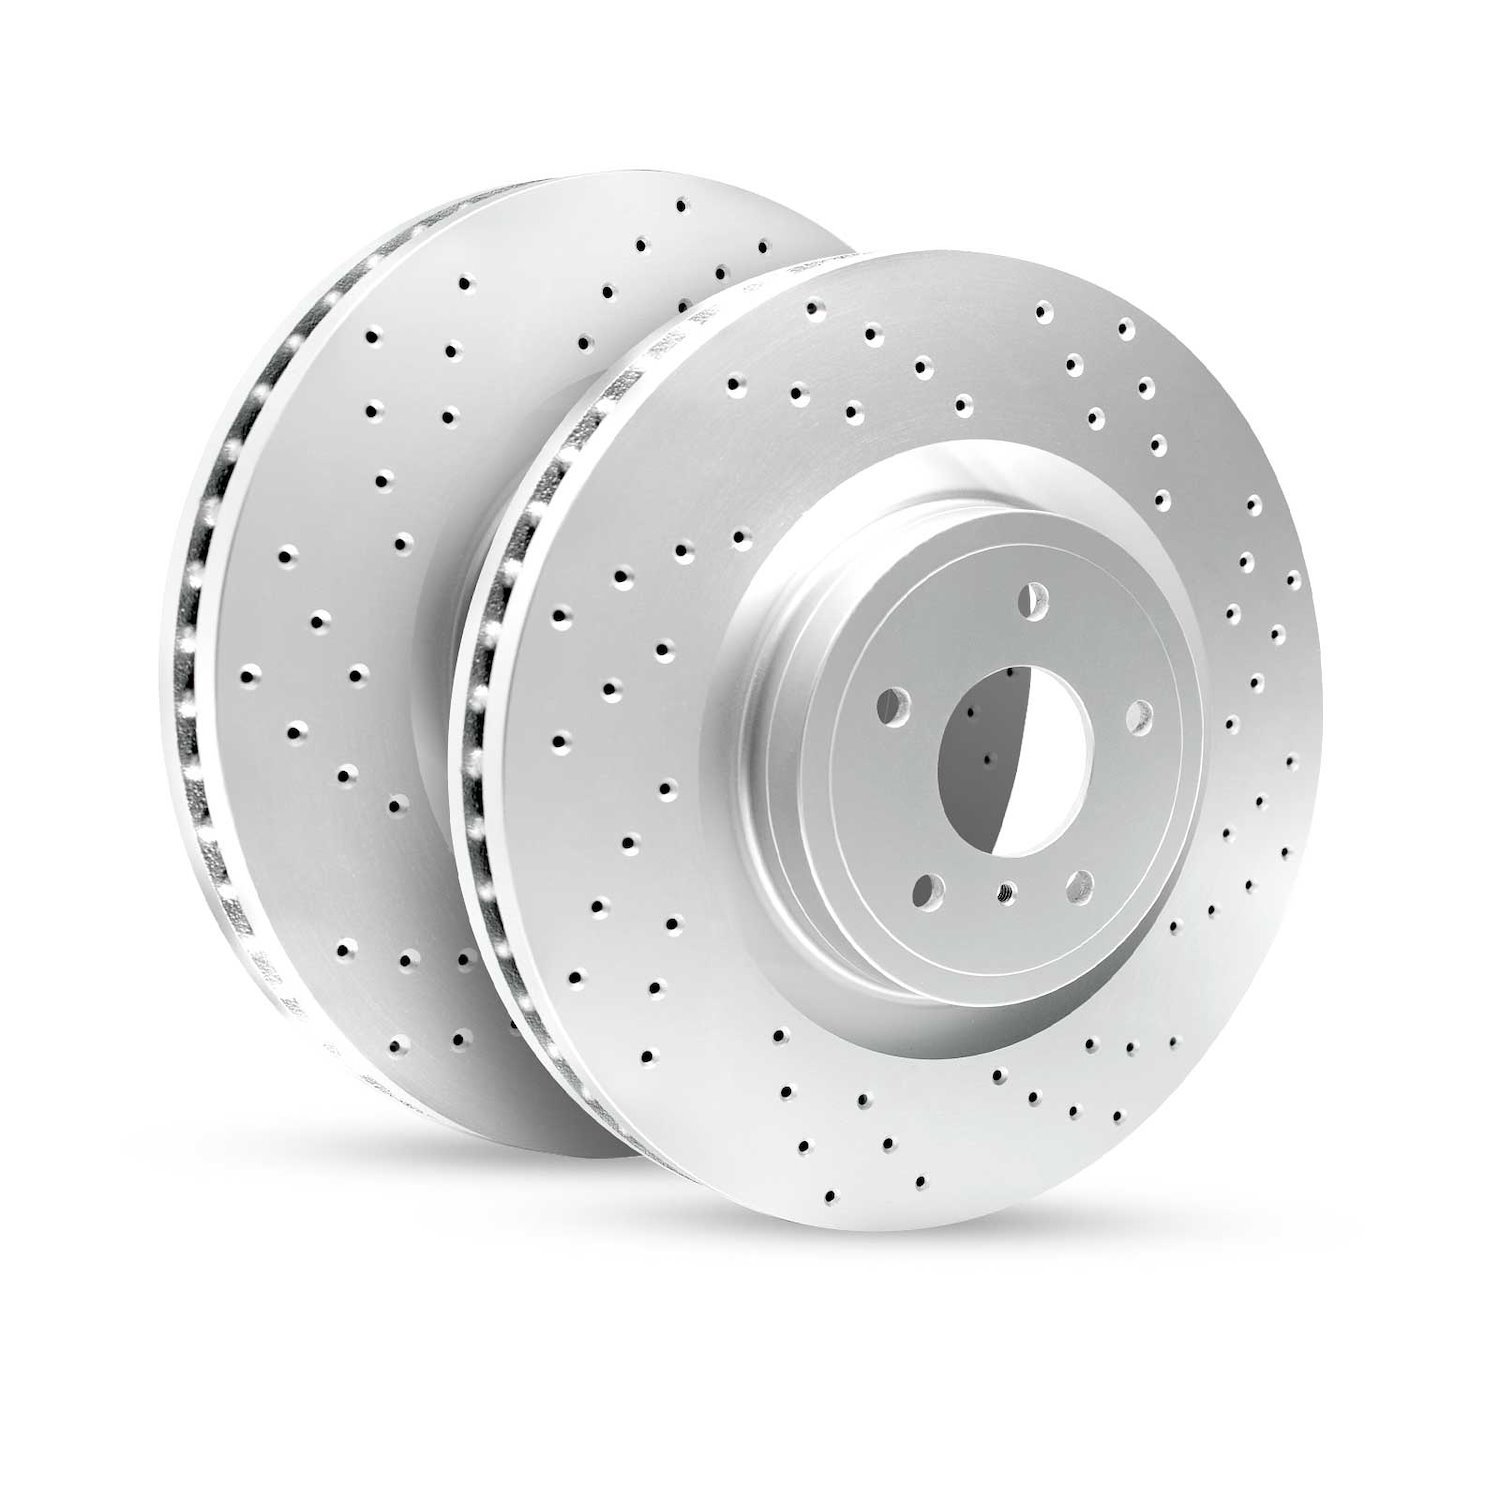 GEO-Carbon Drilled/Slotted Rotors, 1996-2011 Fits Multiple Makes/Models, Position: Front